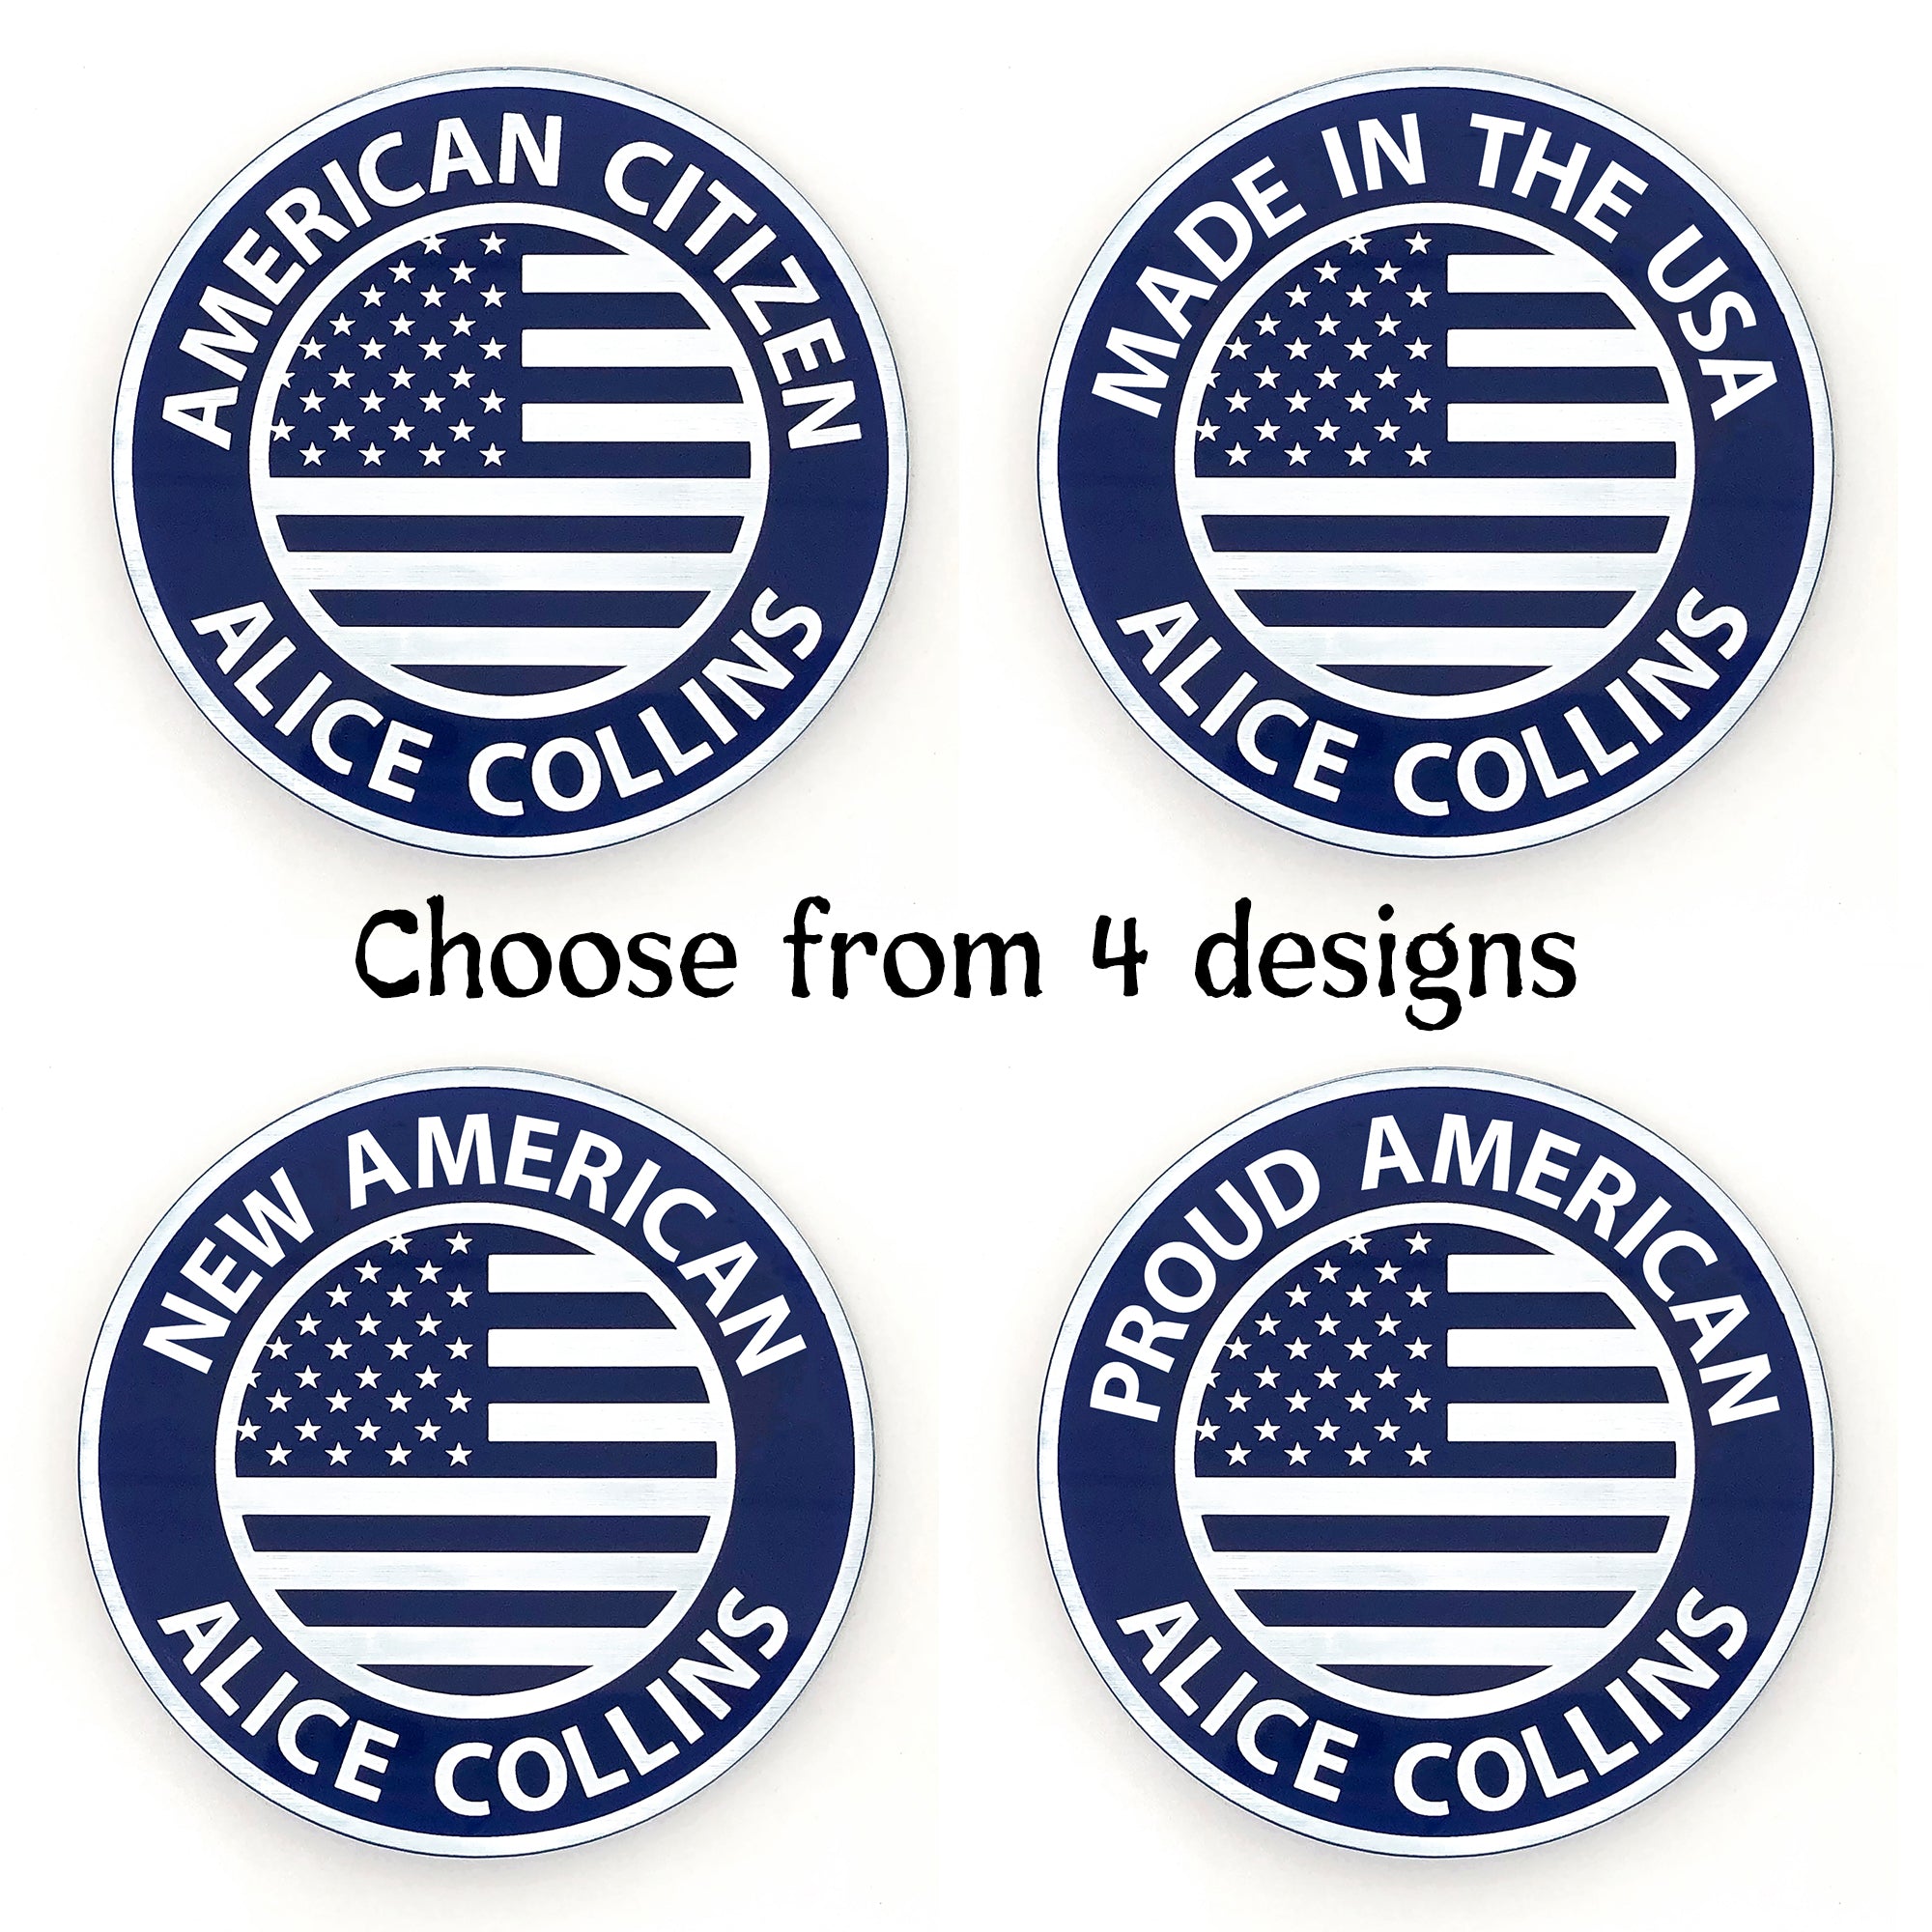 American Citizen Coaster | Brit and Bee